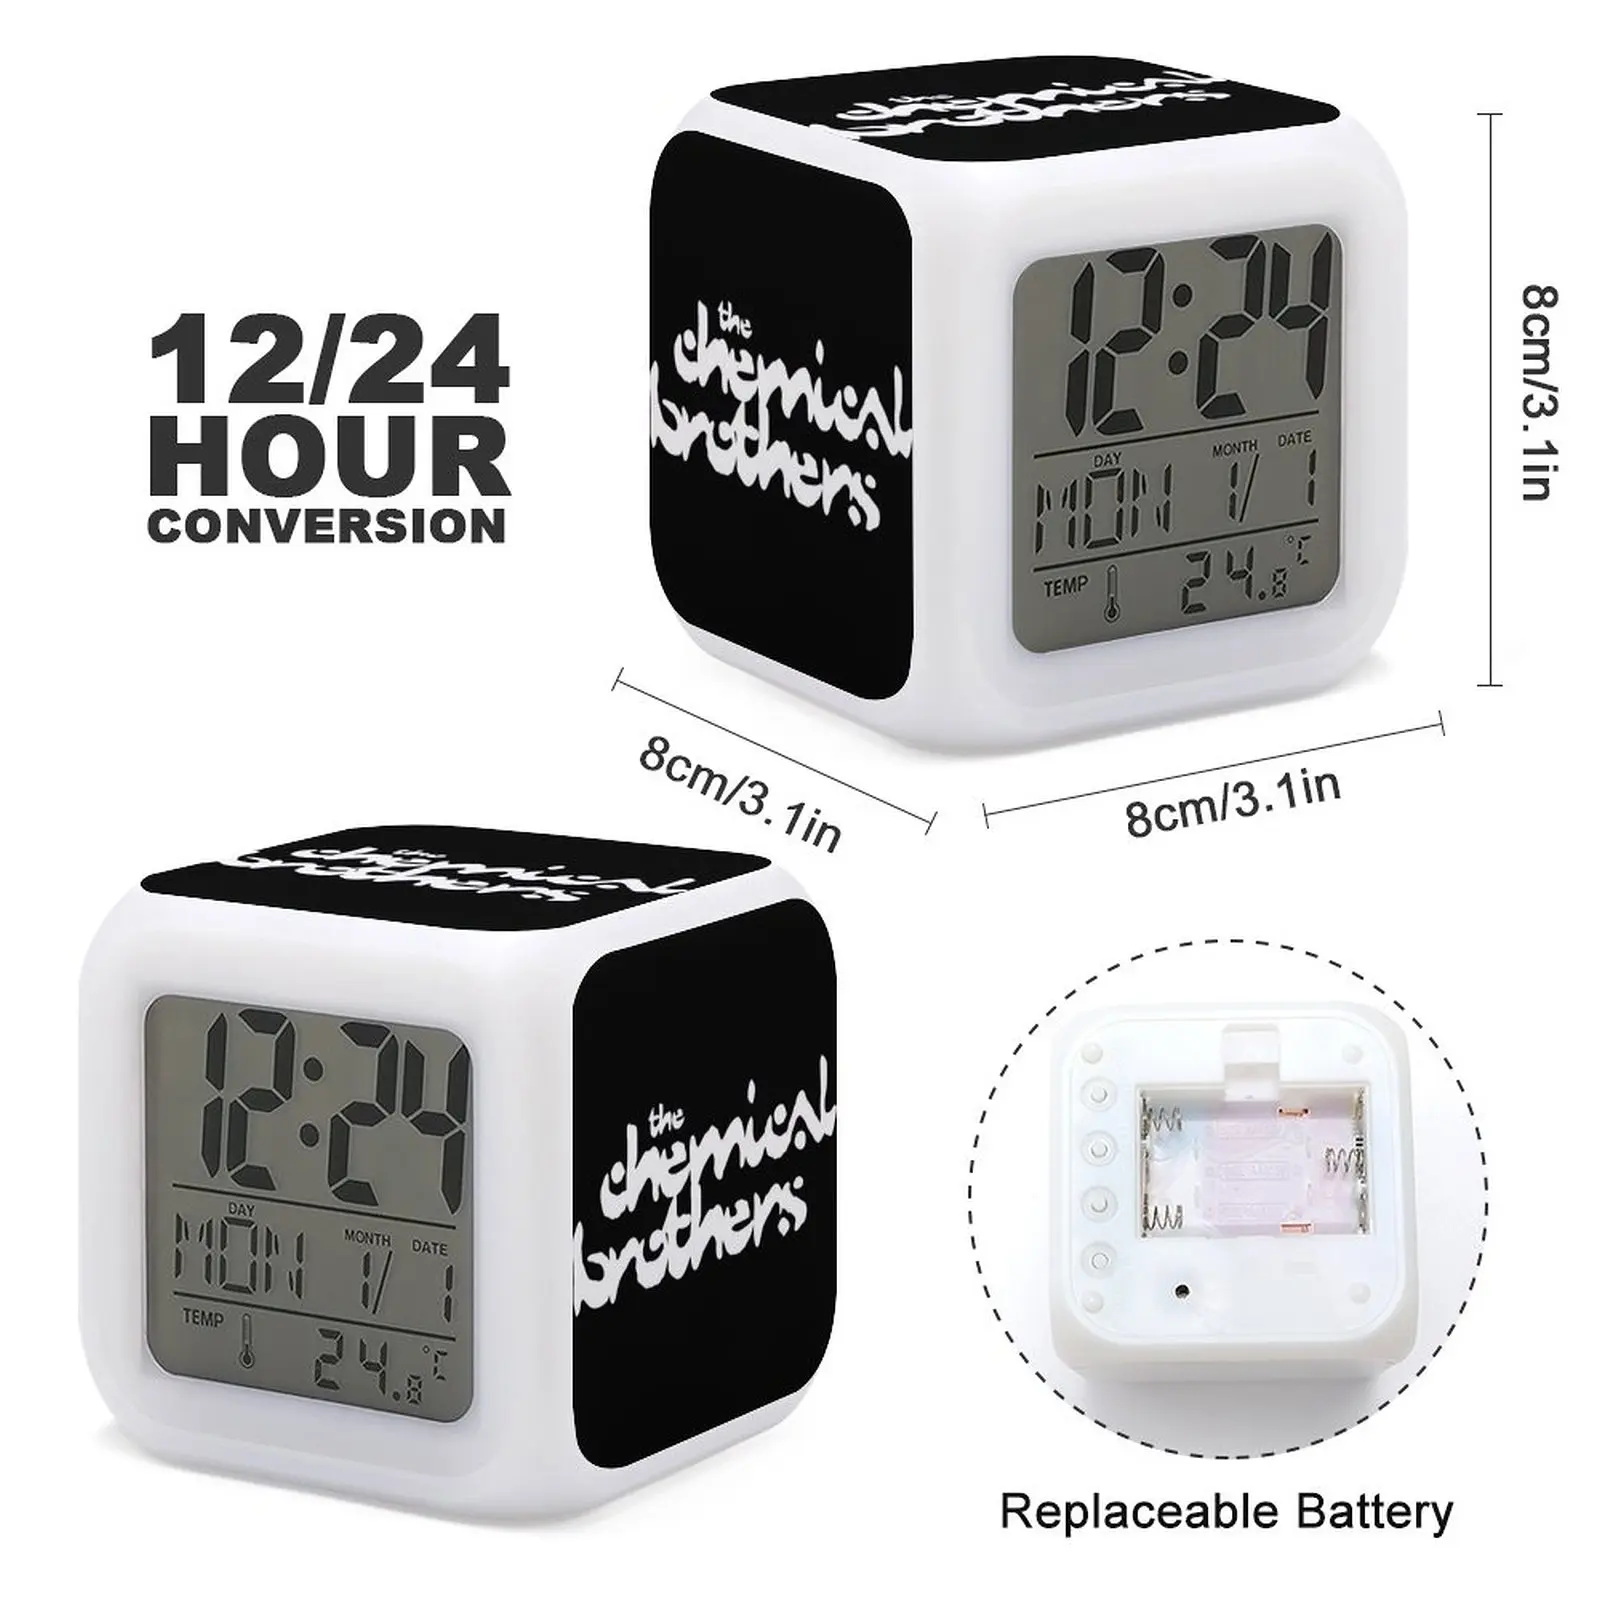 

The Chemical Brothers DJ Set Hotel Umberto DIY Mute Novelty Home Decoration New Colorful Color Changing Alarm Clock LED Display